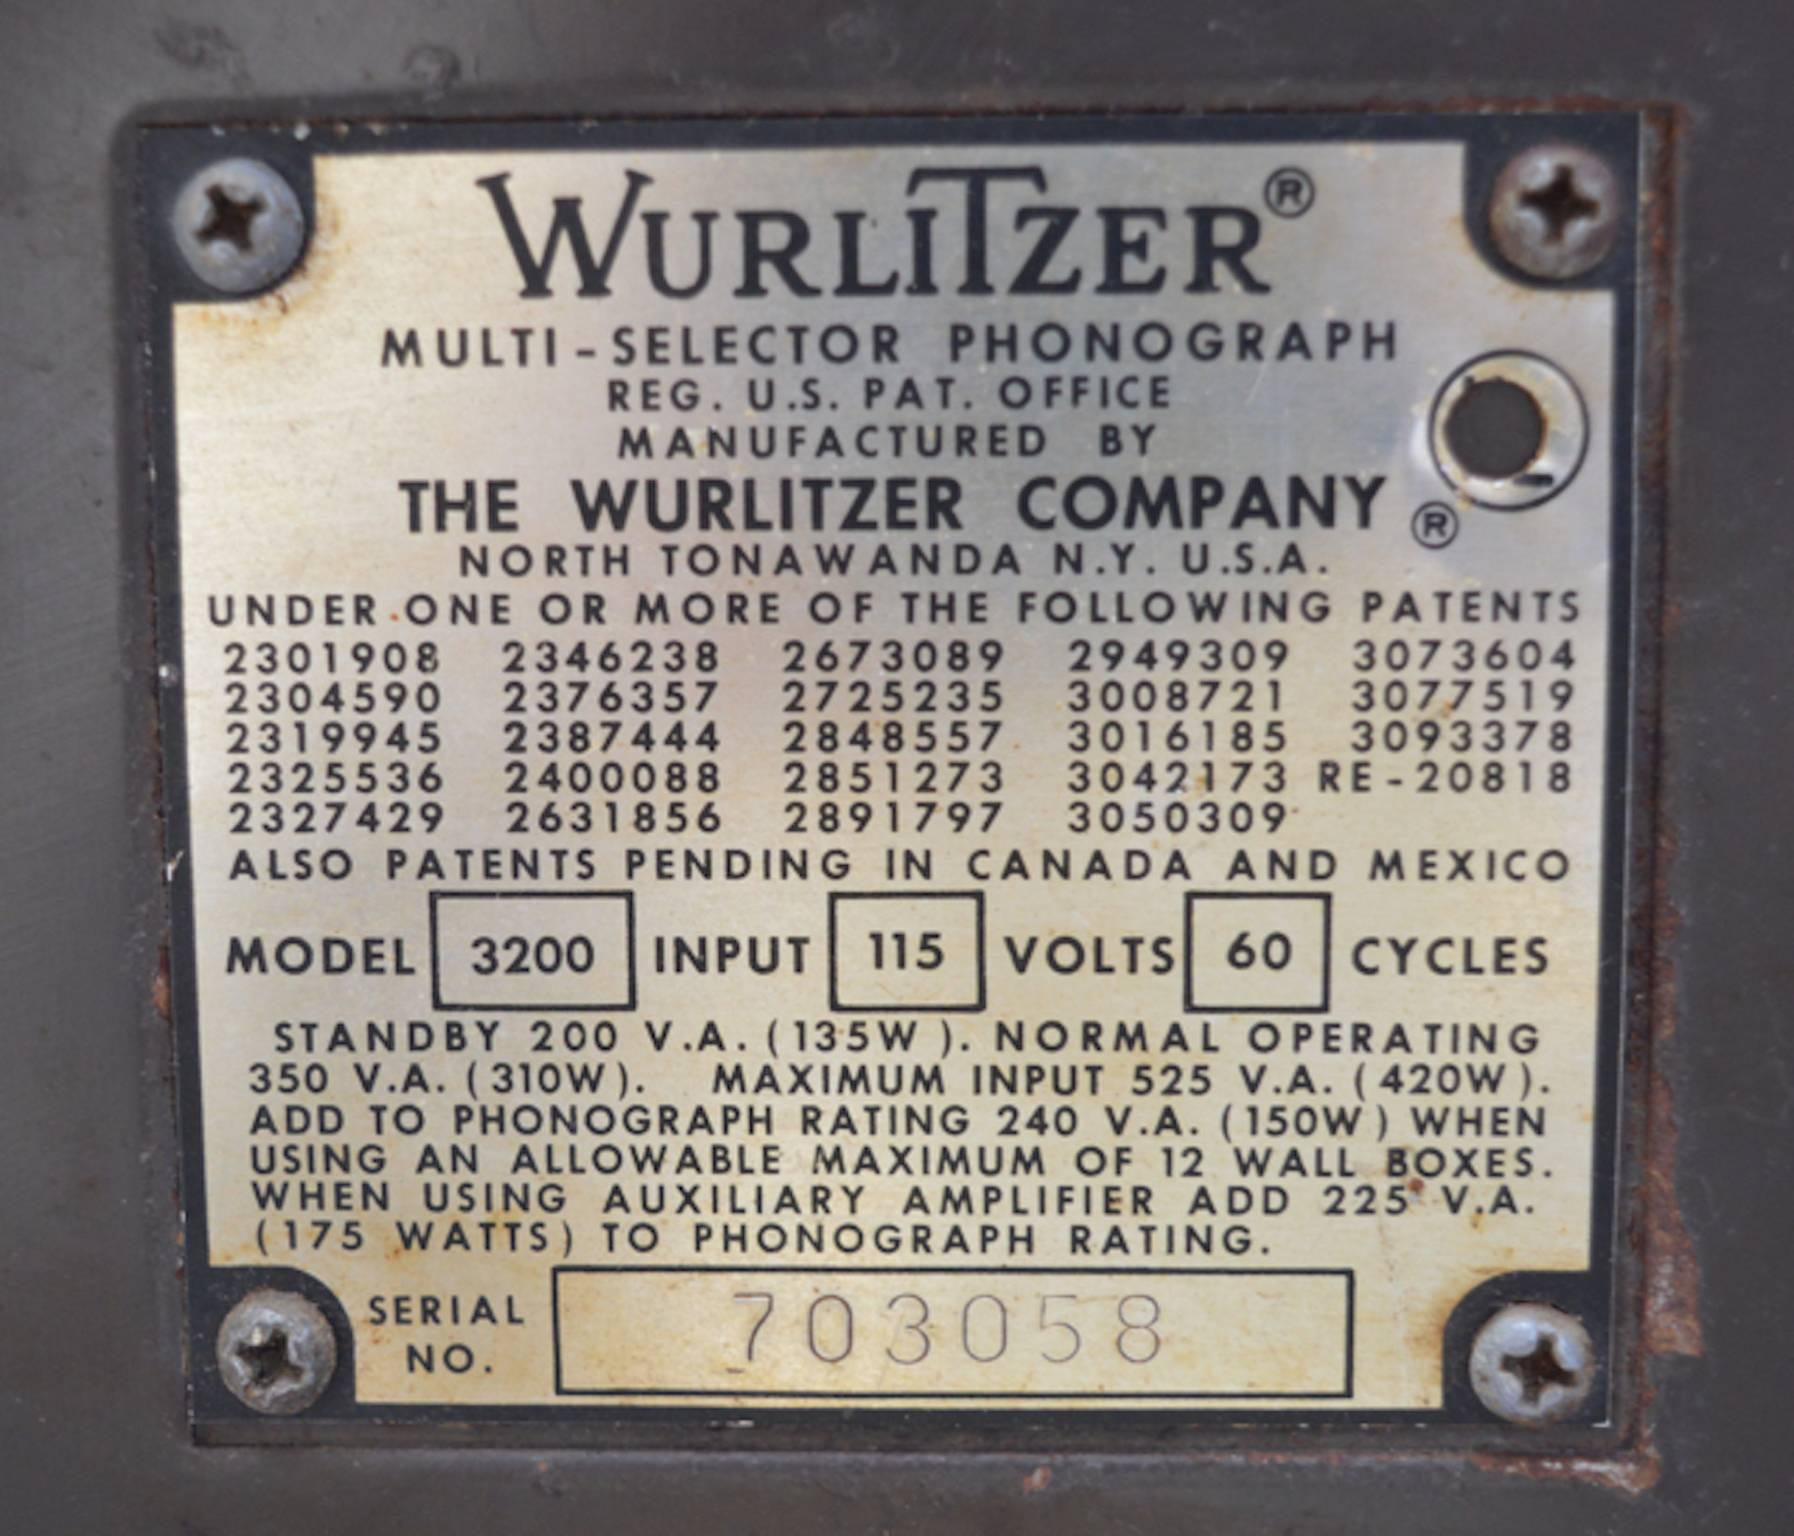 Original 1968 Wurlitzer Americana II Jukebox in working condition!
Model 3200 Americana II holds 200 selections and was the last Wurlitzer to use the carousel mechanism. Loaded with old 45's and also an extra 2 boxes full of mixed 45